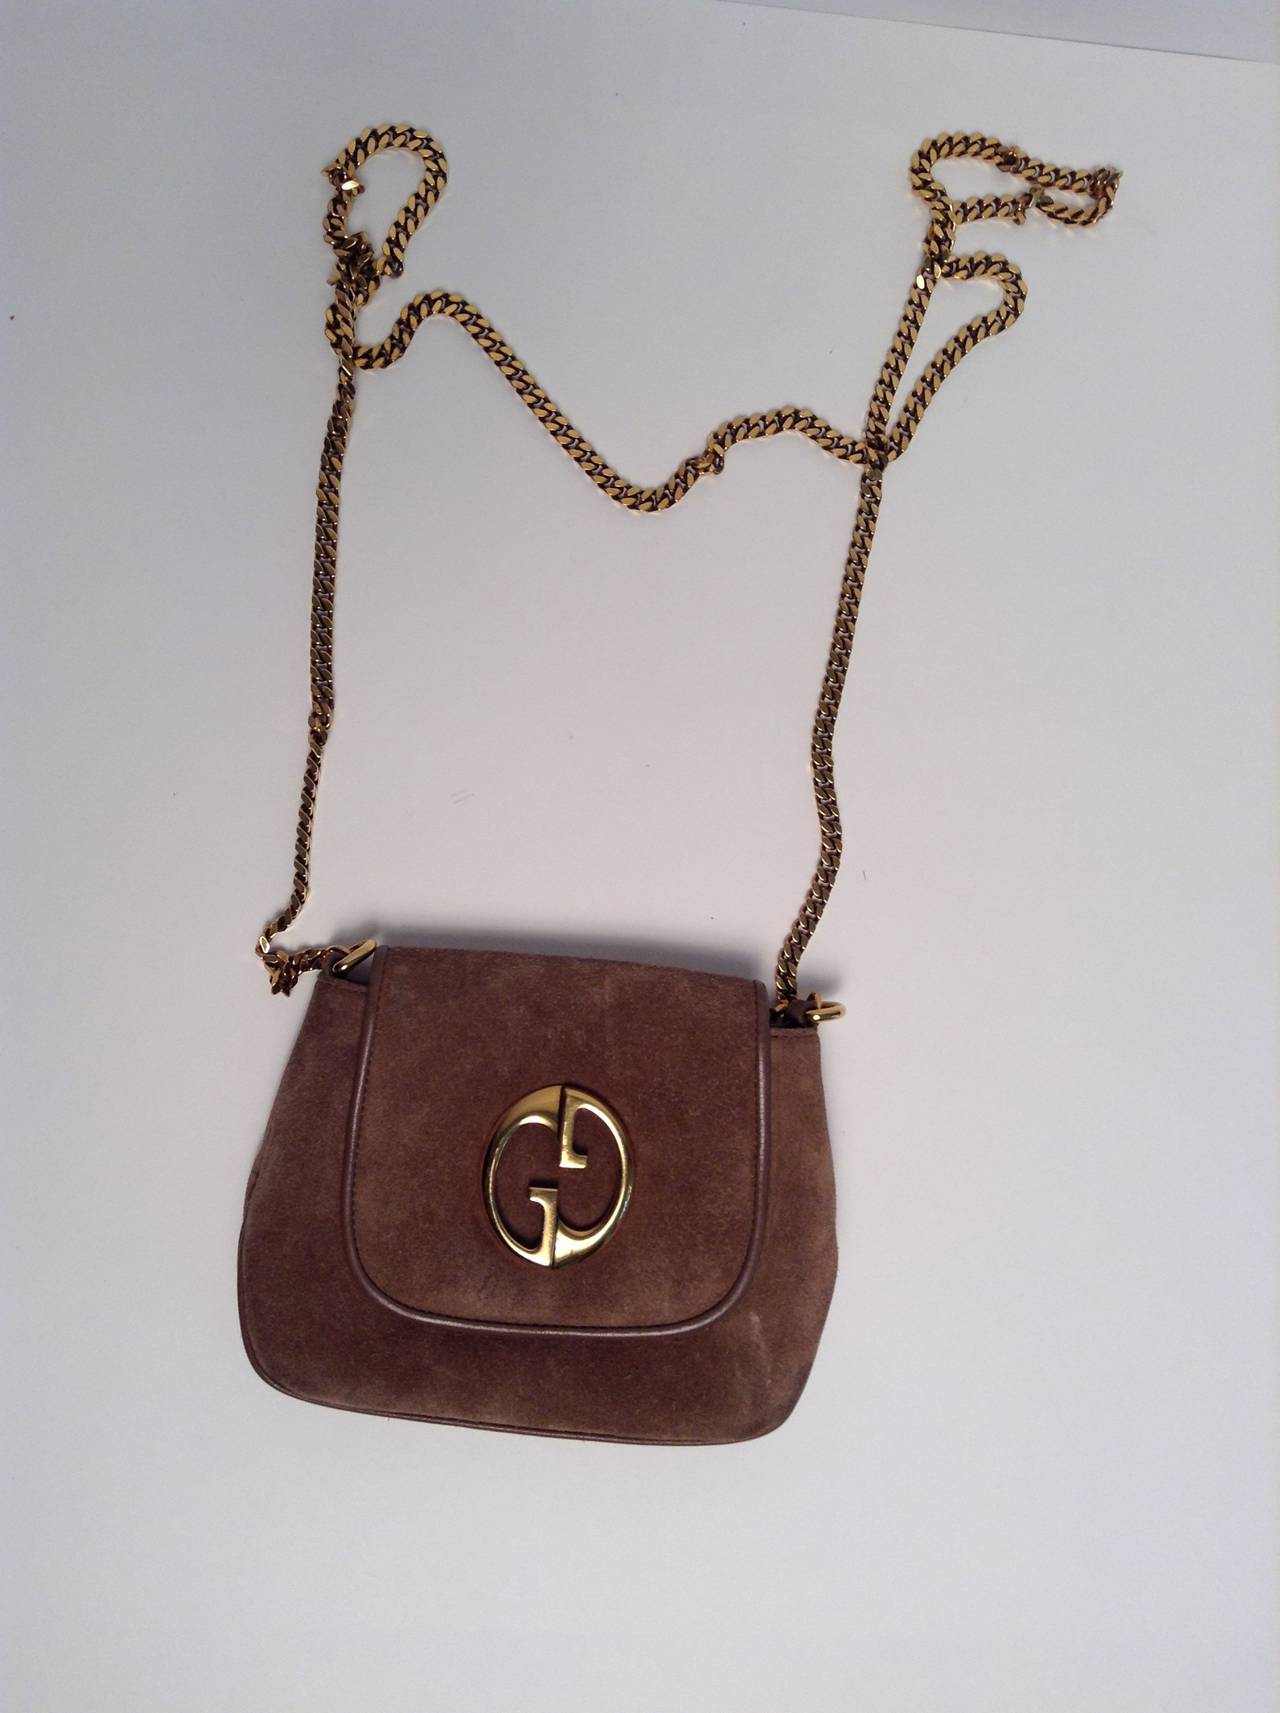 Finish off any evening ensemble with this classic Gucci Taupe Suede Gold Chain shoulder bag. The 1973 Reissue features soft taupe suede with tonal taupe leather finish at the trim. Gold hardware and a long gold chain perfectly decorate the adorable